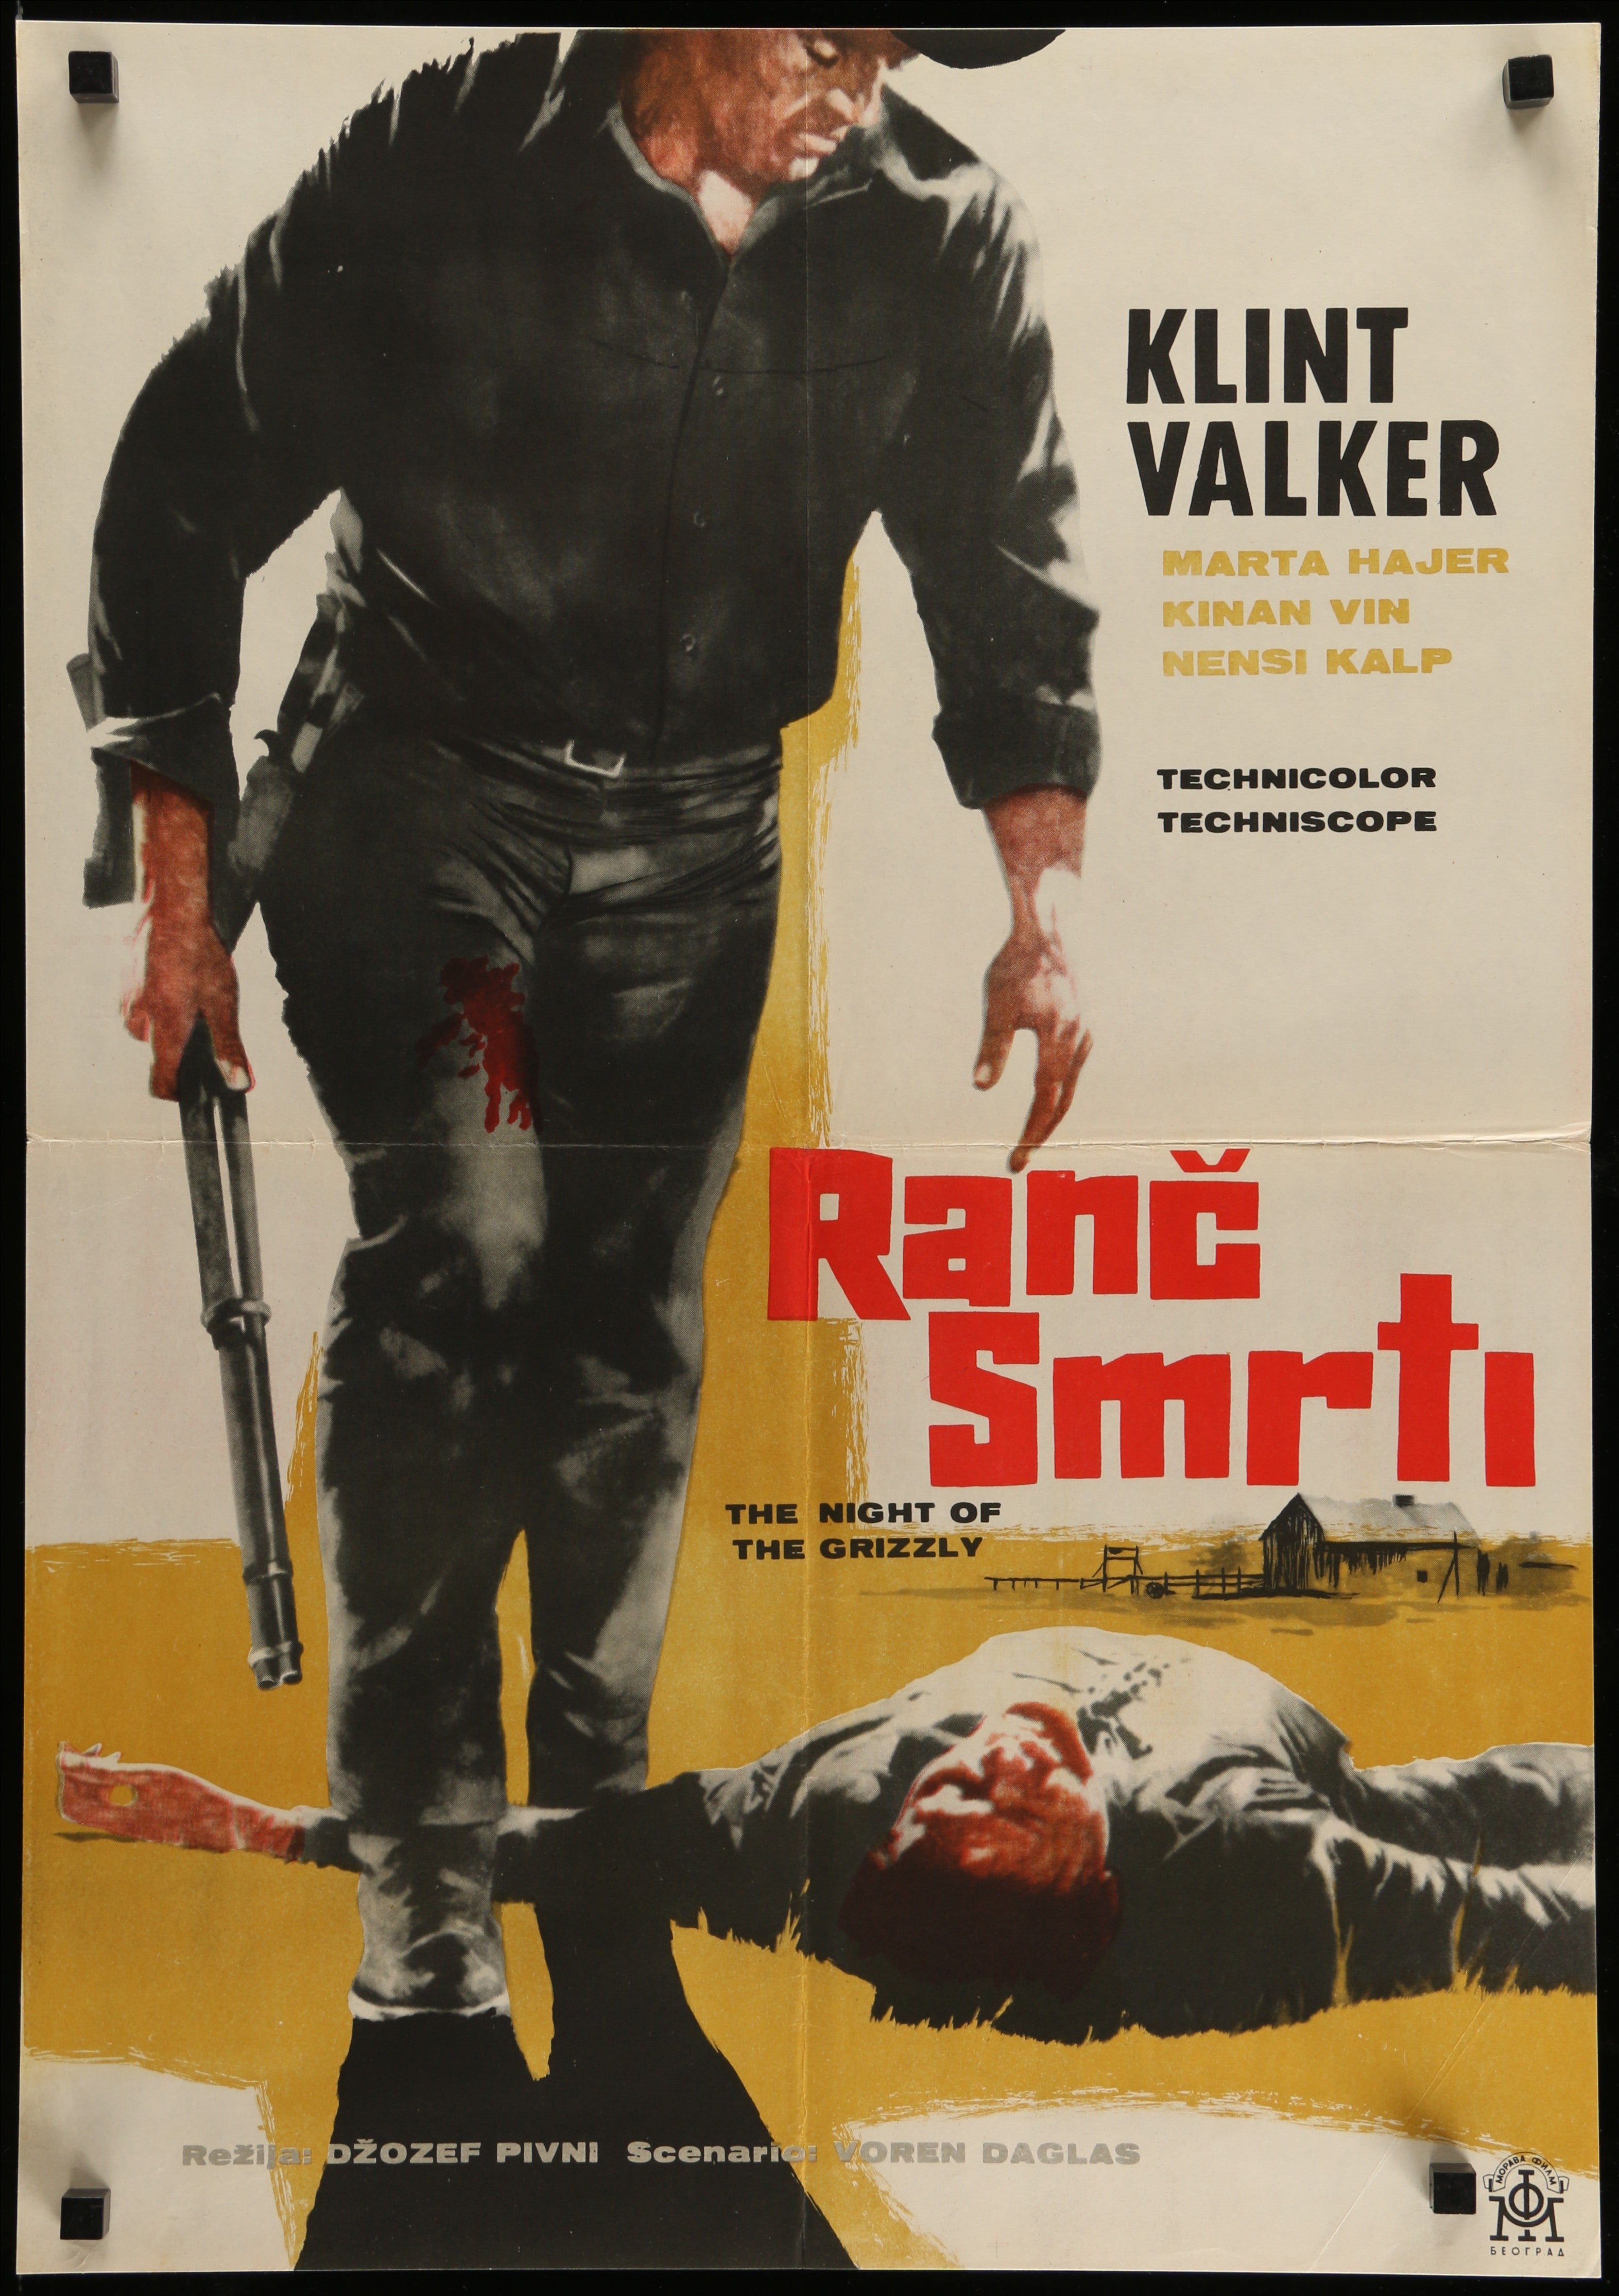 Night of the Grizzly - CLINT WALKER (Ranč Smrti)